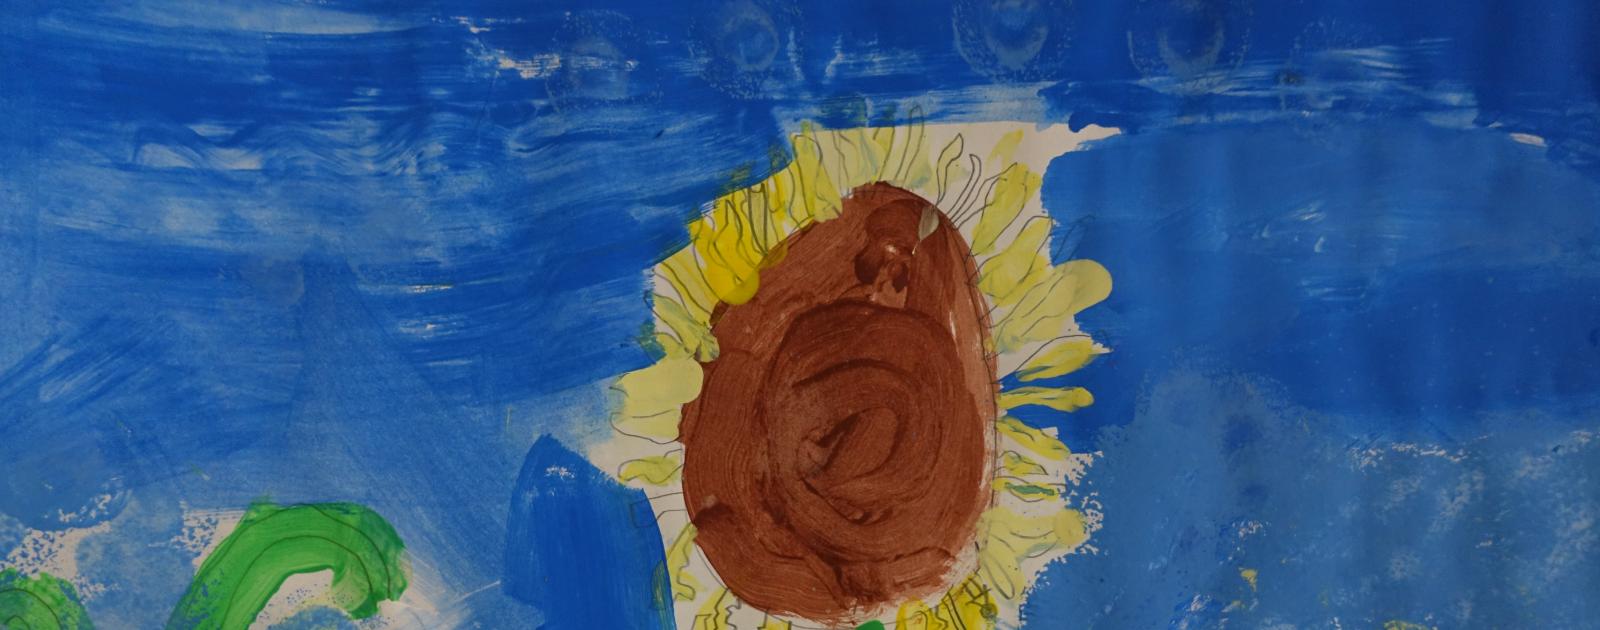 Child's drawing of sunflowers